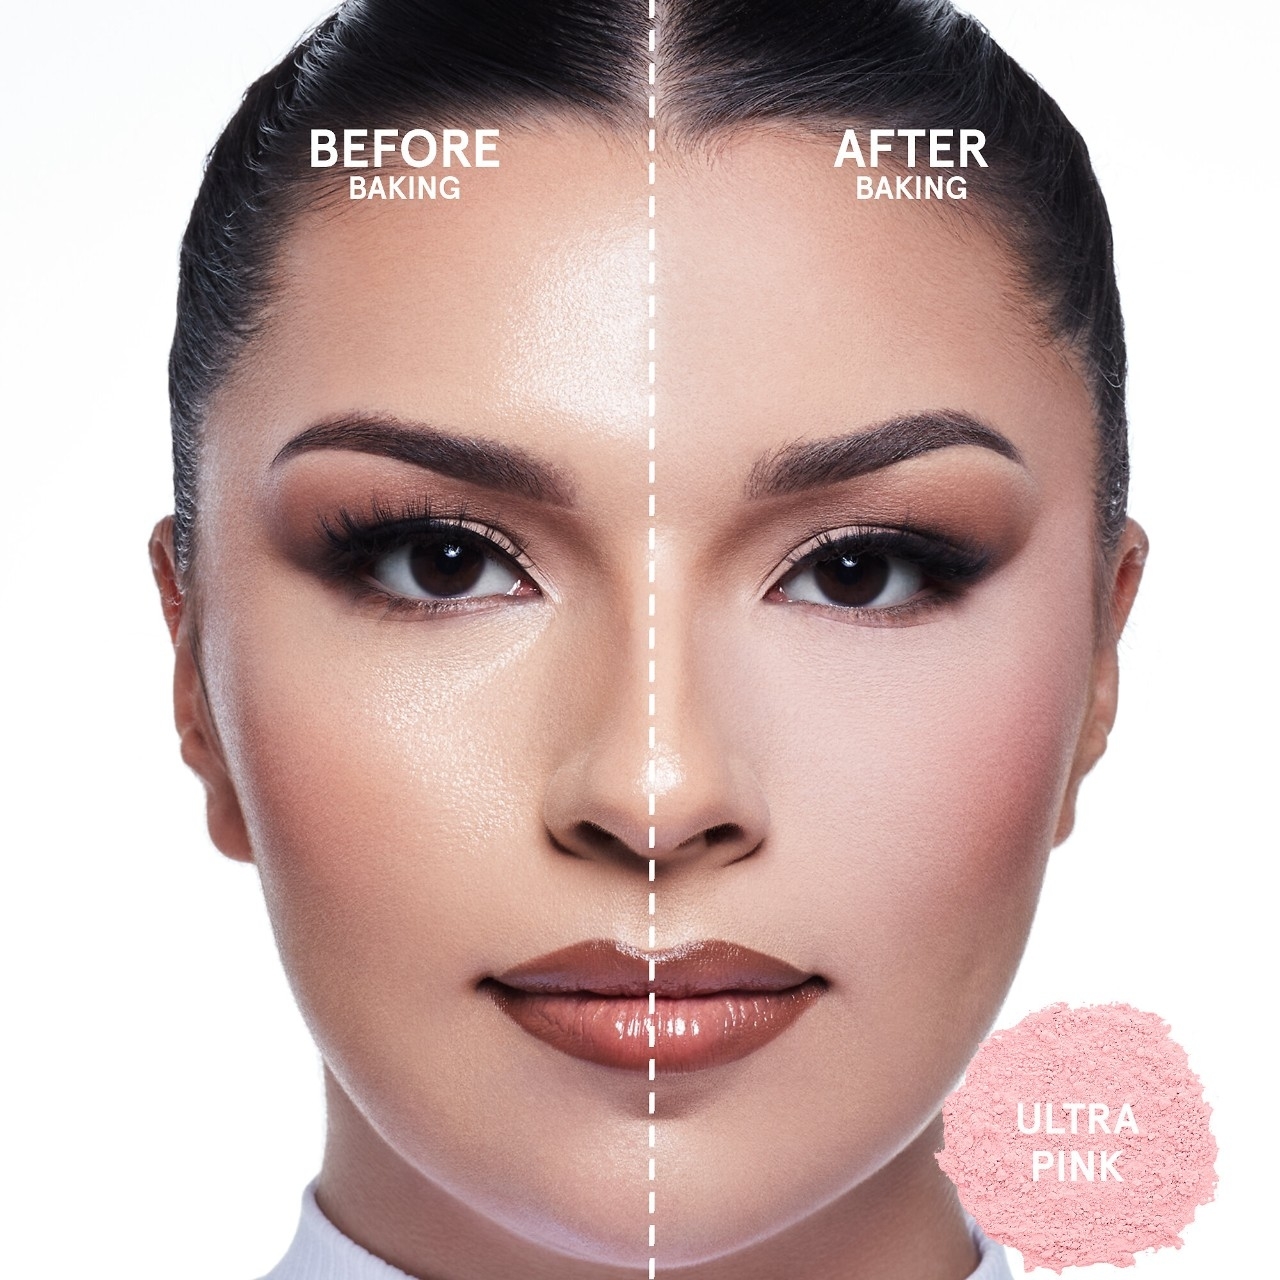 A model showing the before and after of applying the setting powder